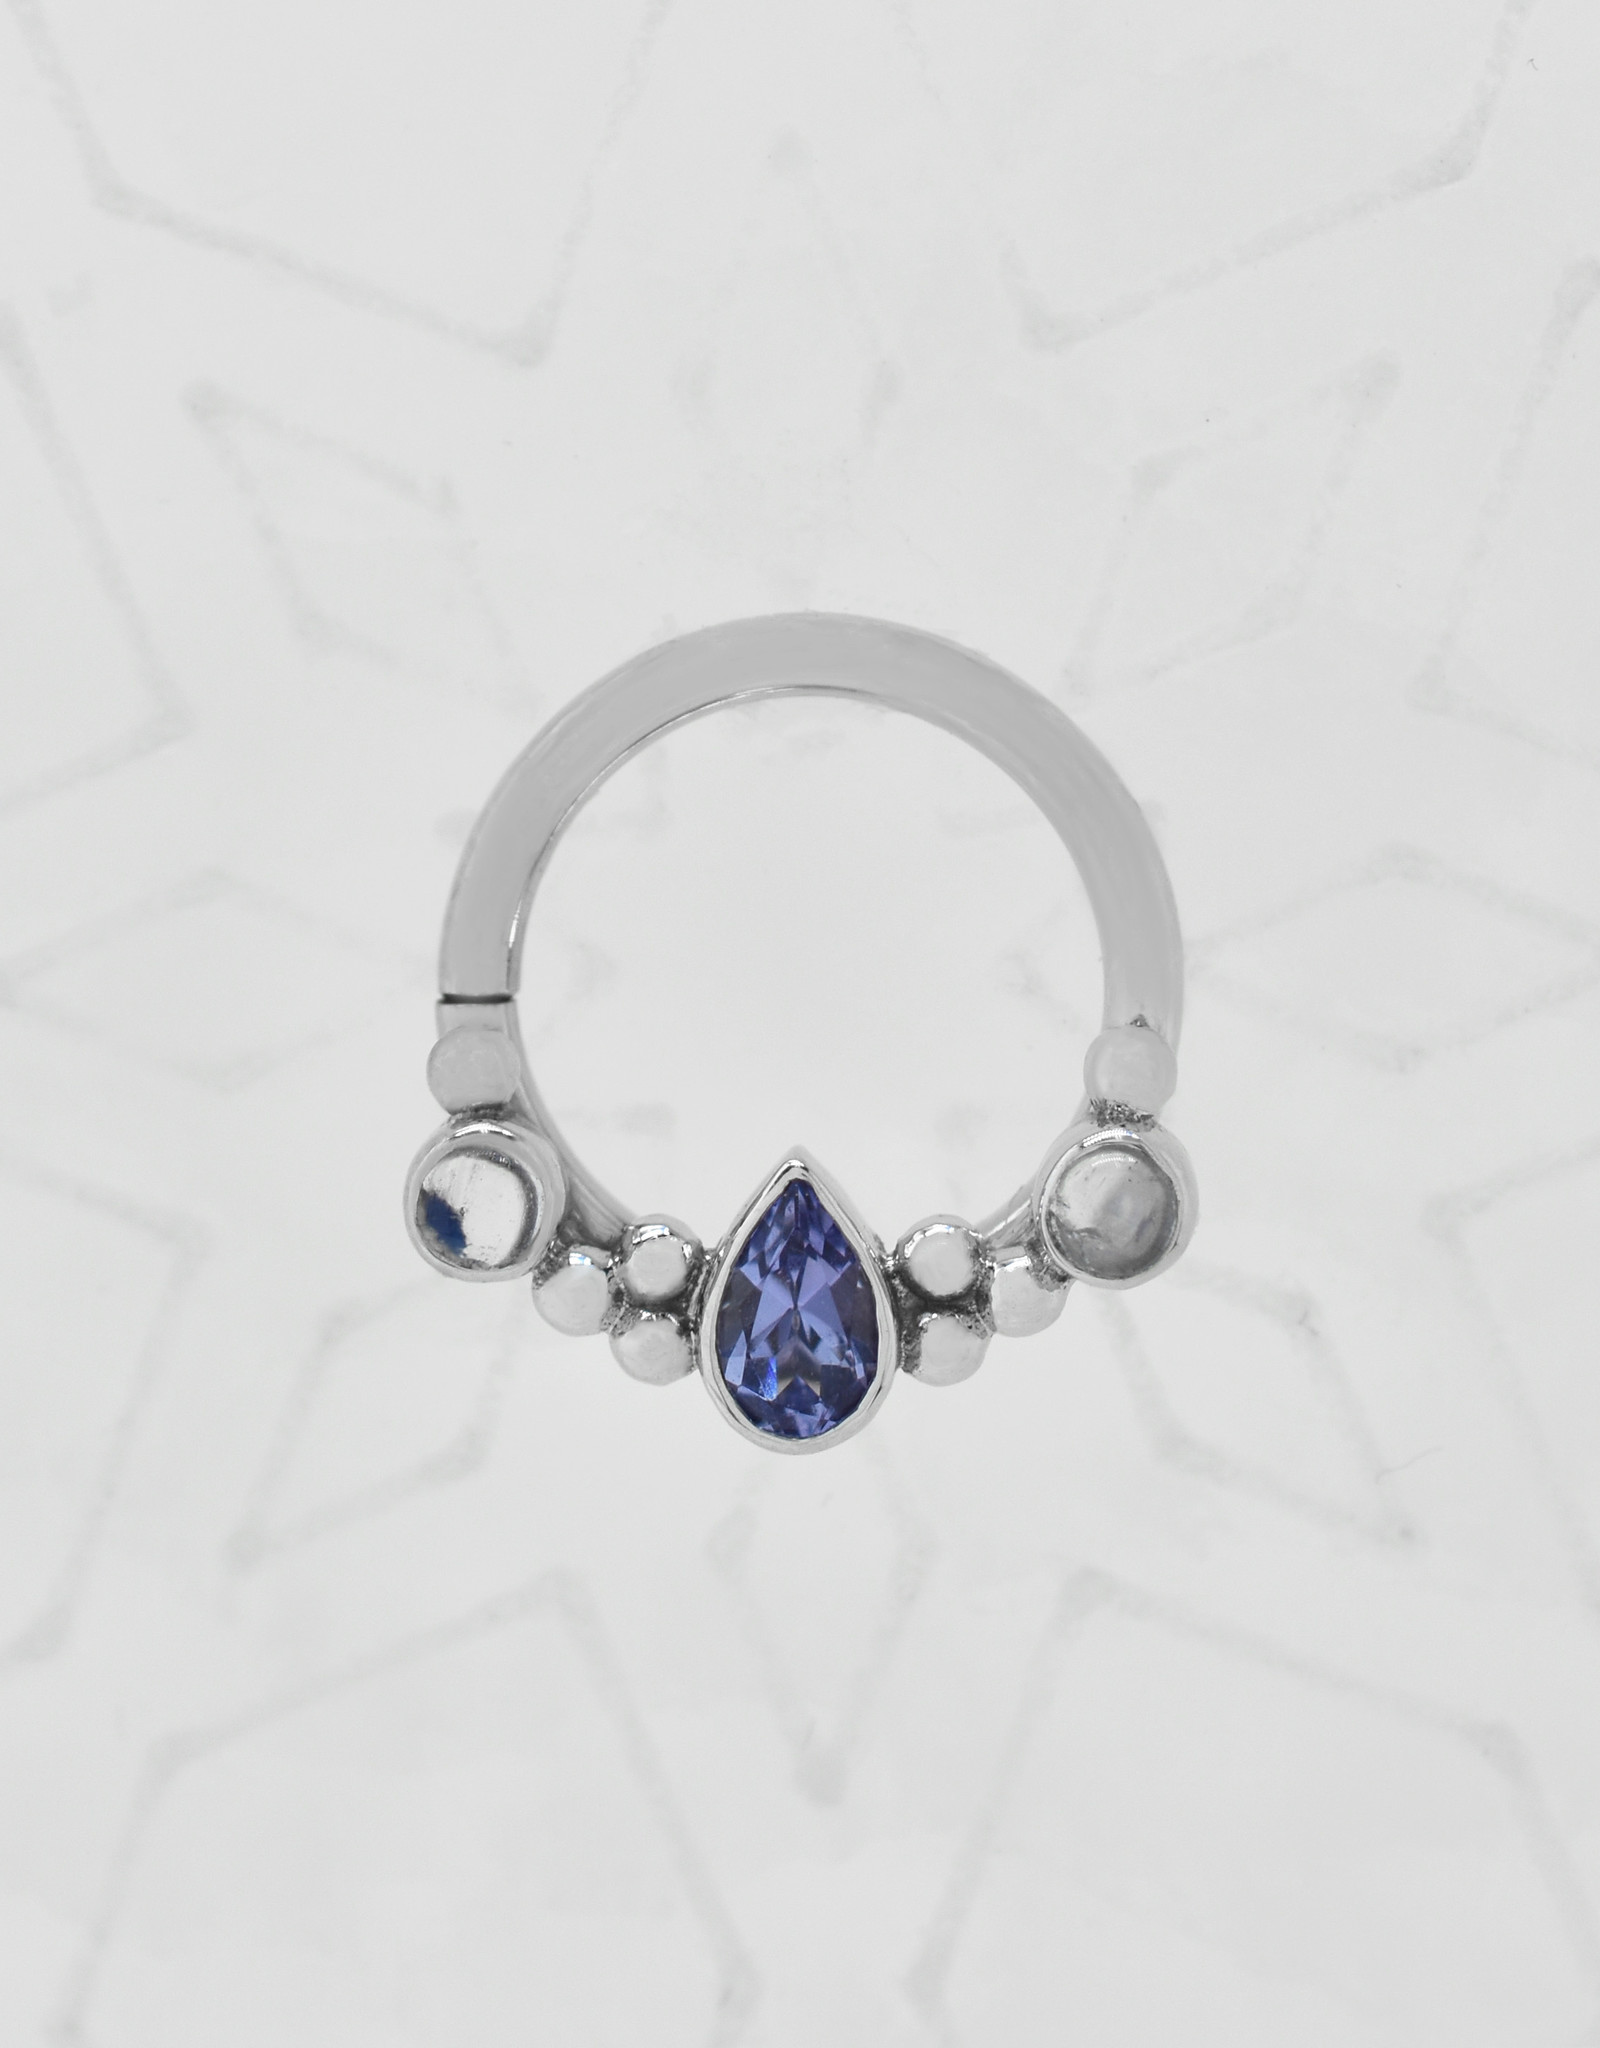 BVLA BVLA 16g 11/32” Eden Pear (inside out) with Rainbow Moonstone +Tanzanite Pear WG